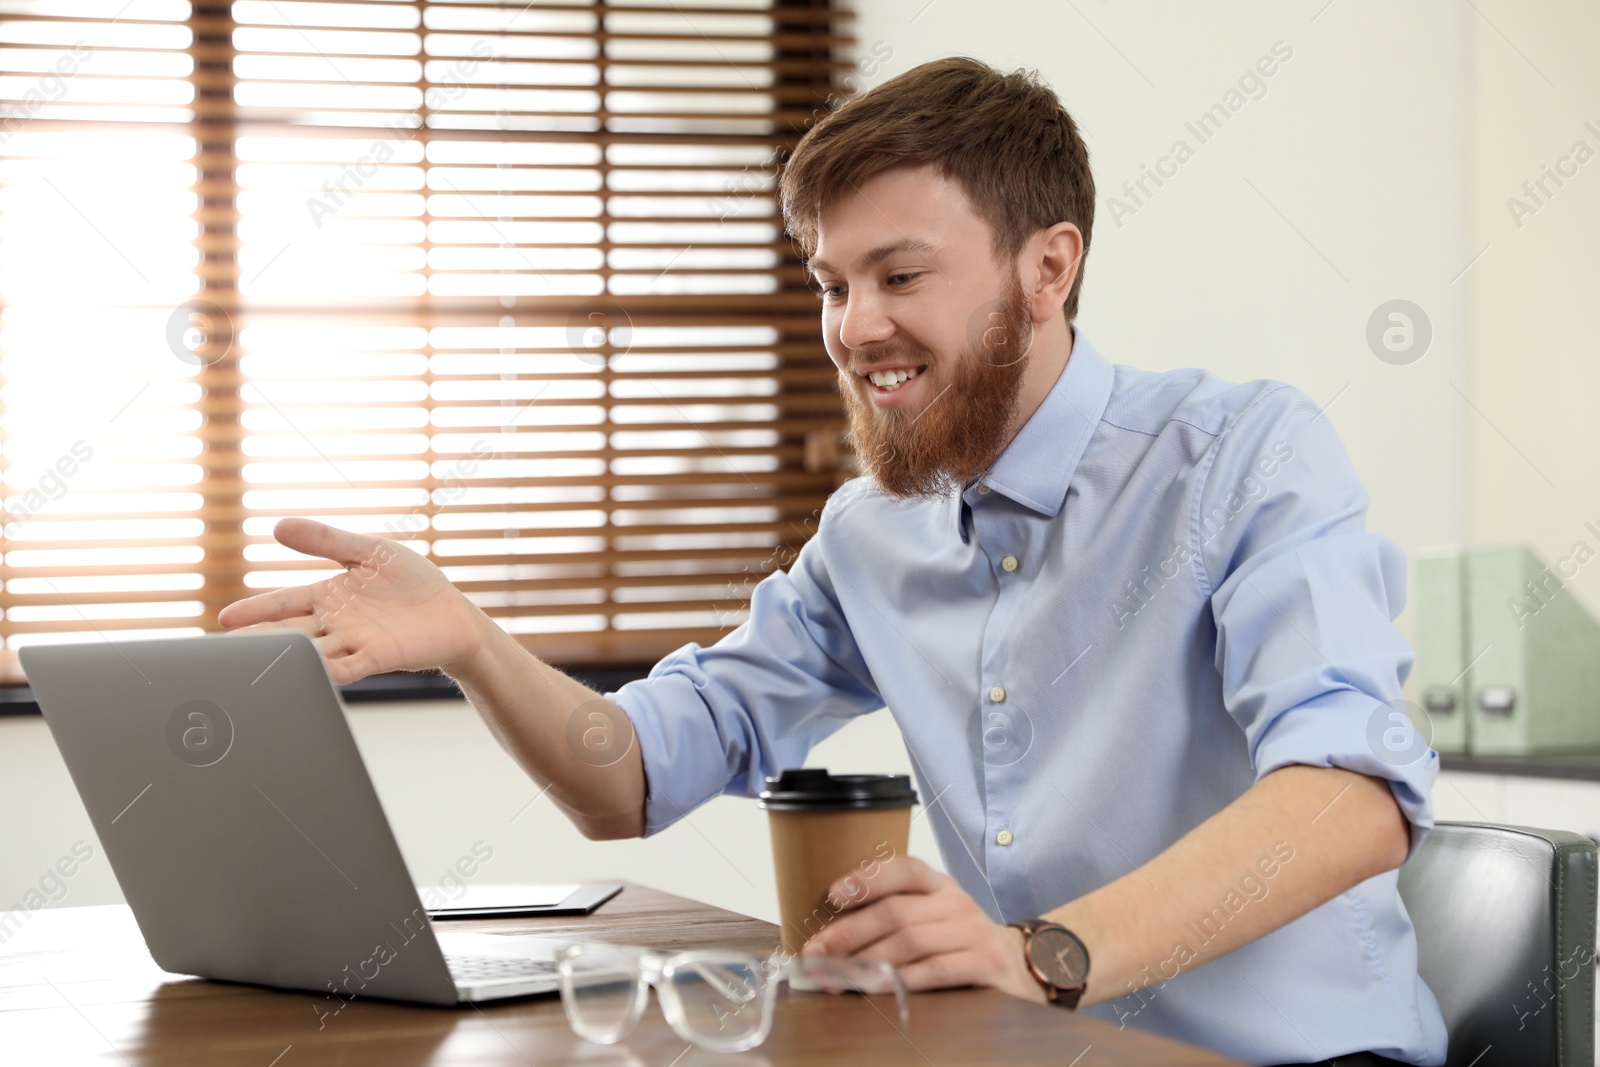 Photo of Man using video chat on laptop in home office